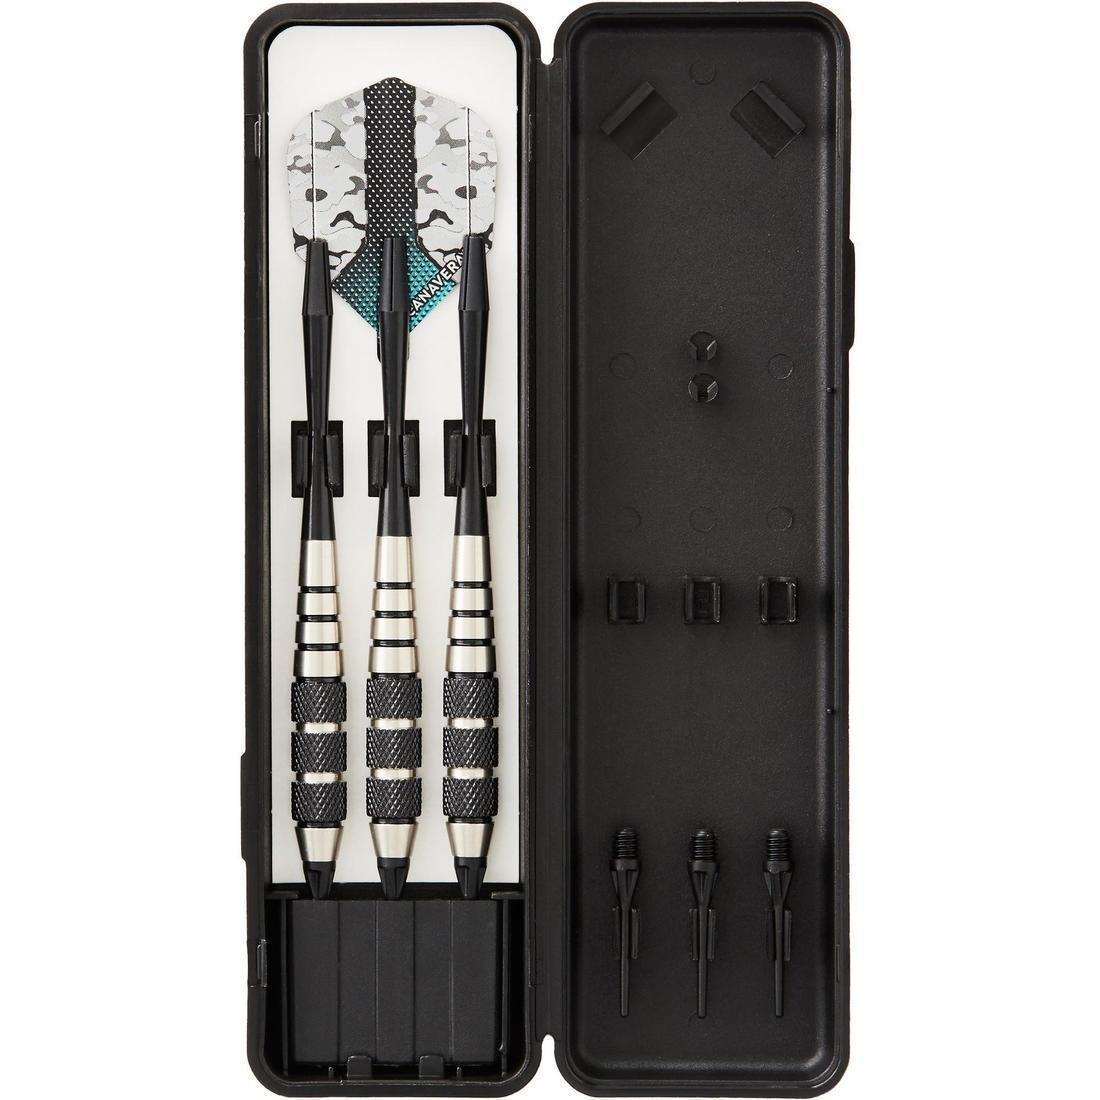 CANAVERAL - S560 Soft Tip Darts Tri-Pack